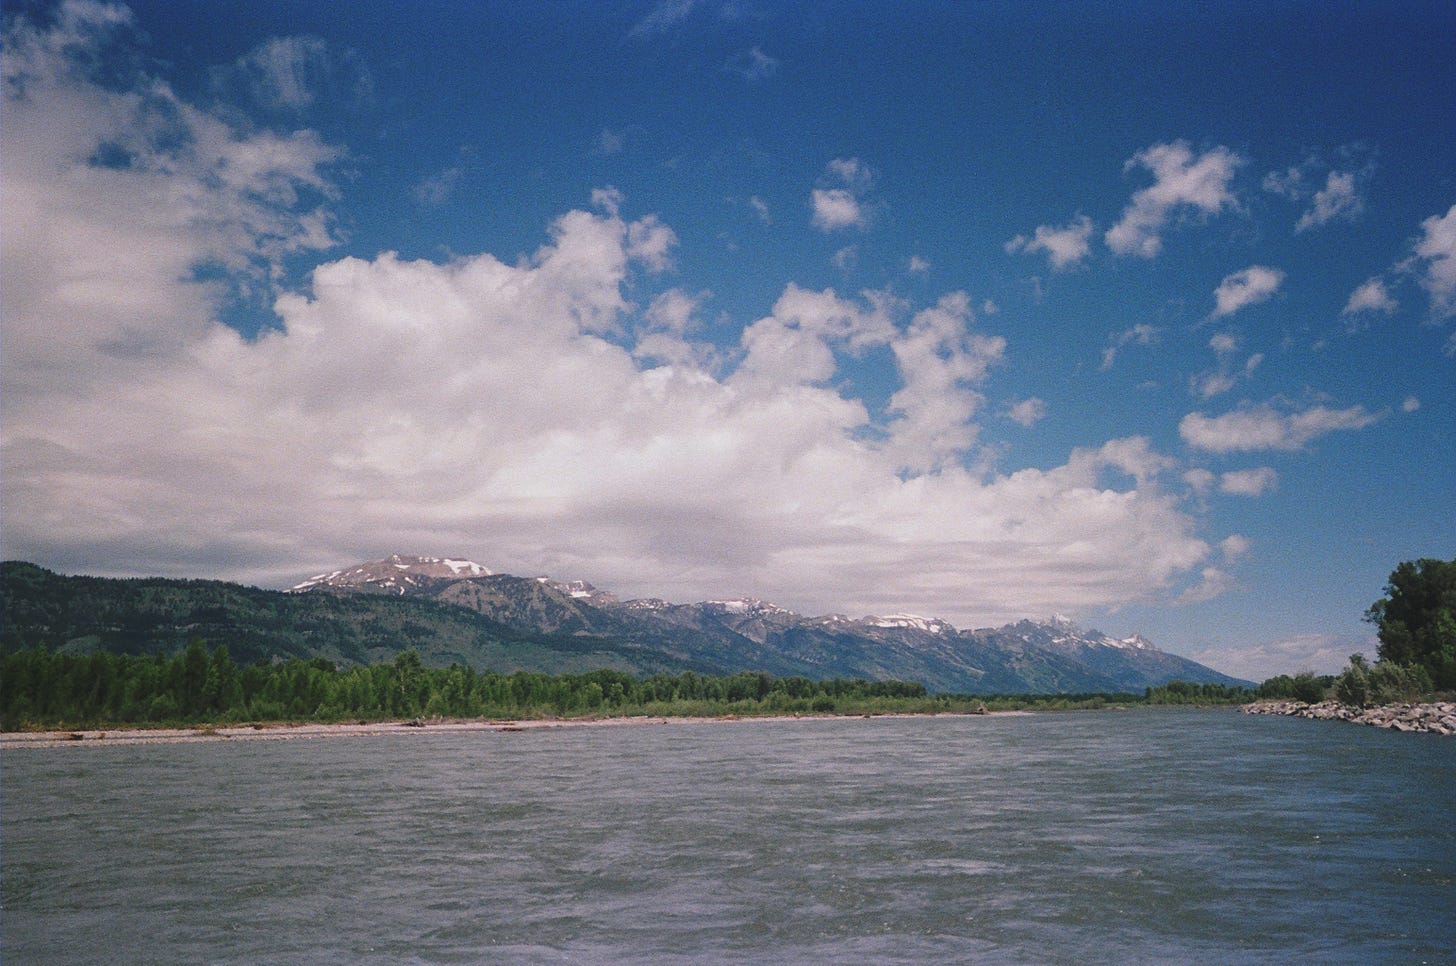 View of a lake with mountains on the horizon, overshadowed by big clouds